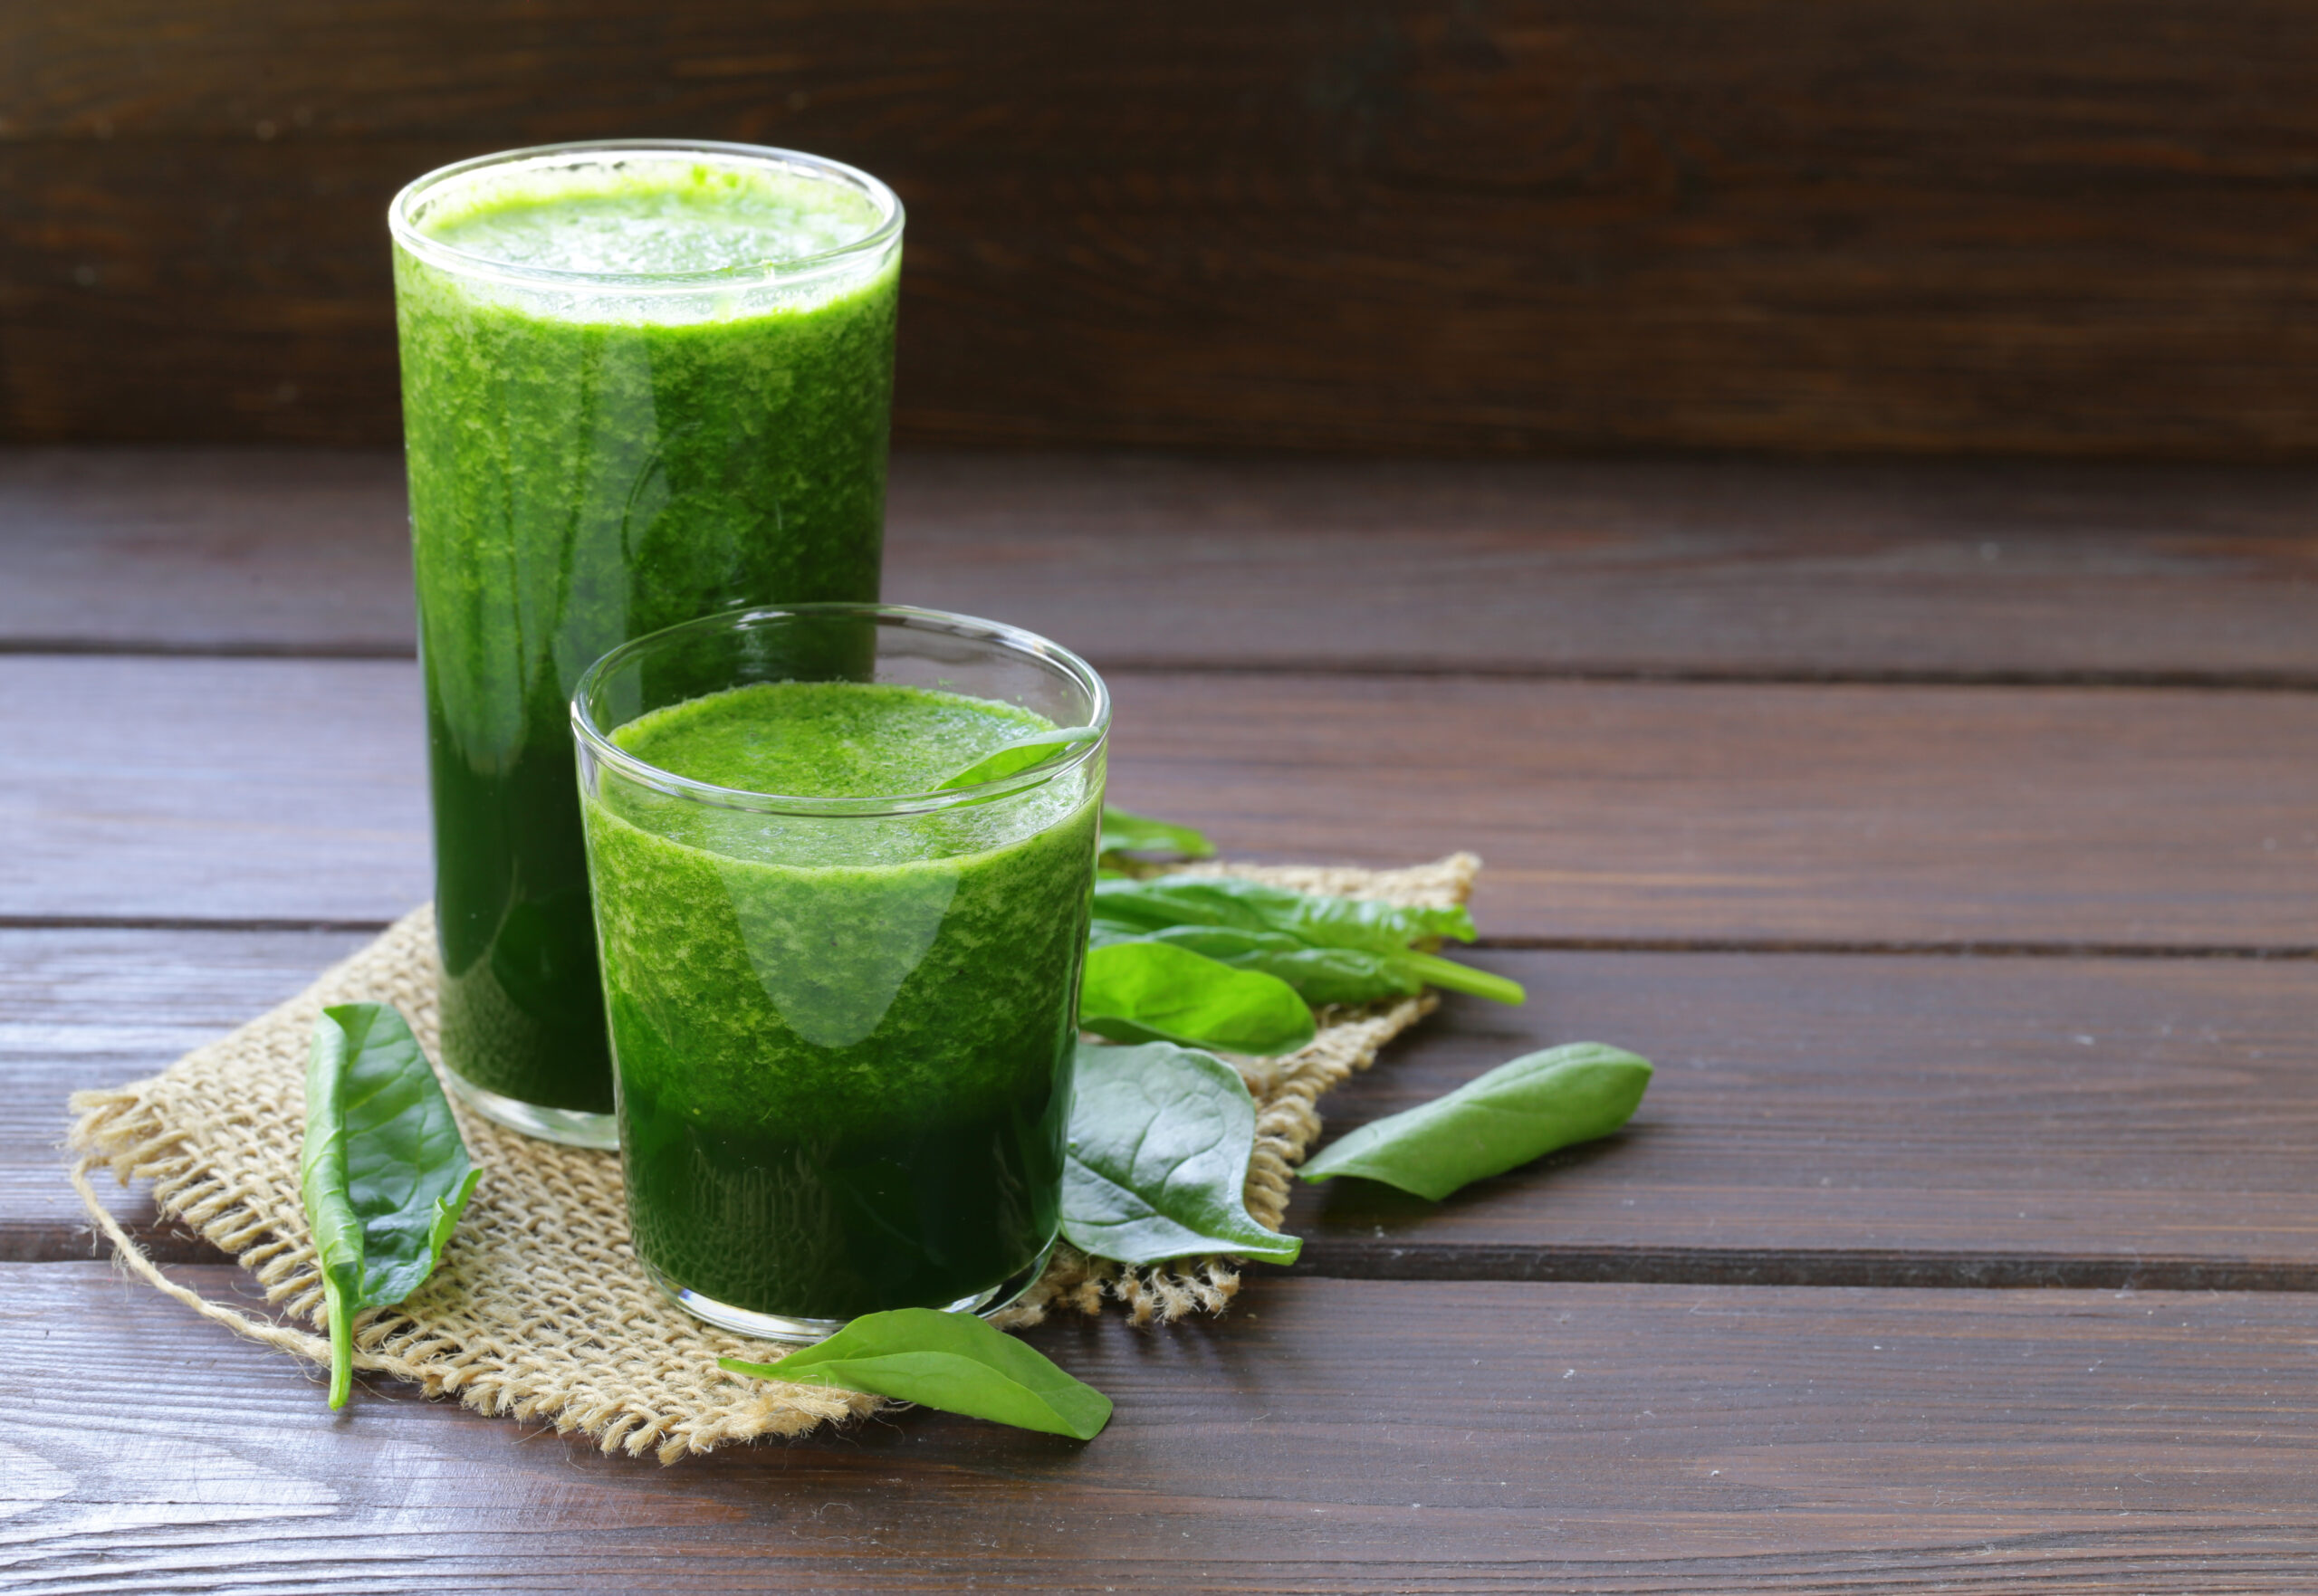 Prepare this healthy and nutritious Green Juice, a lettuce, spinach and kiwi juice.